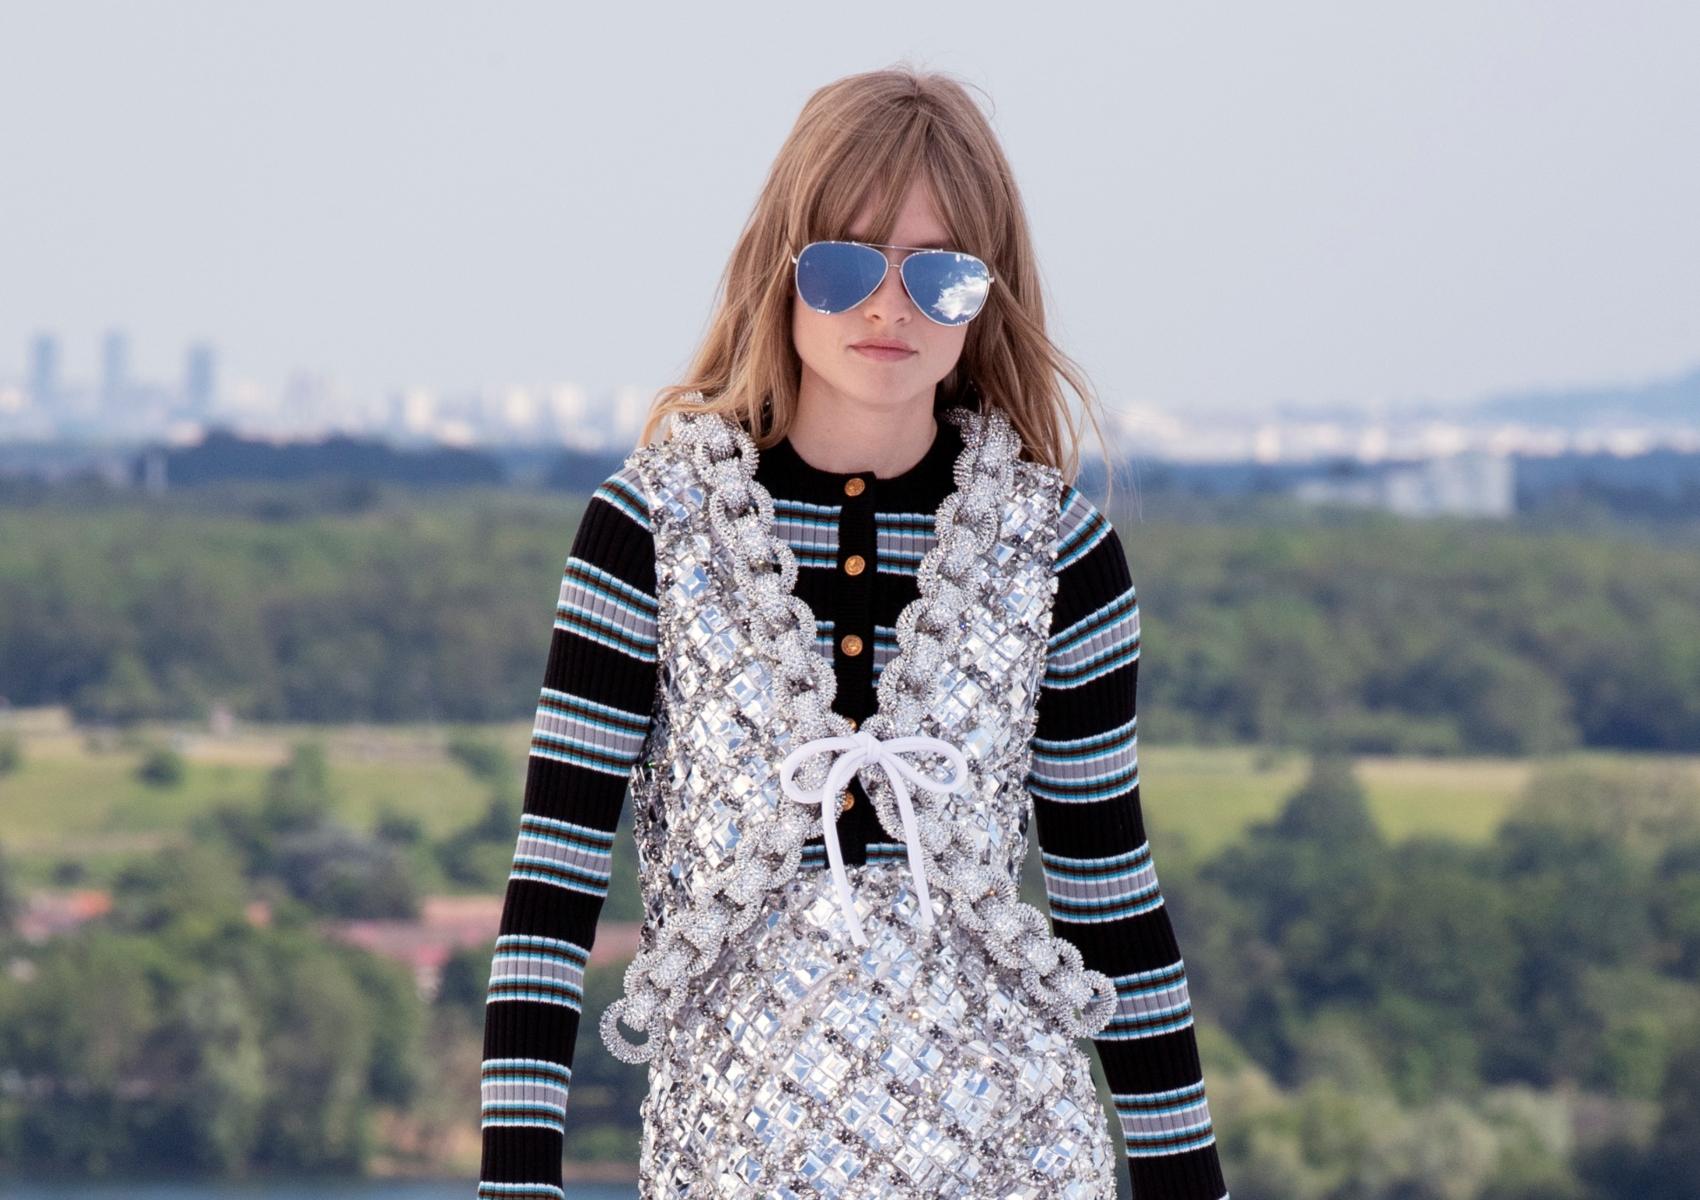 Louis Vuitton bets on geometry in its Cruise collection